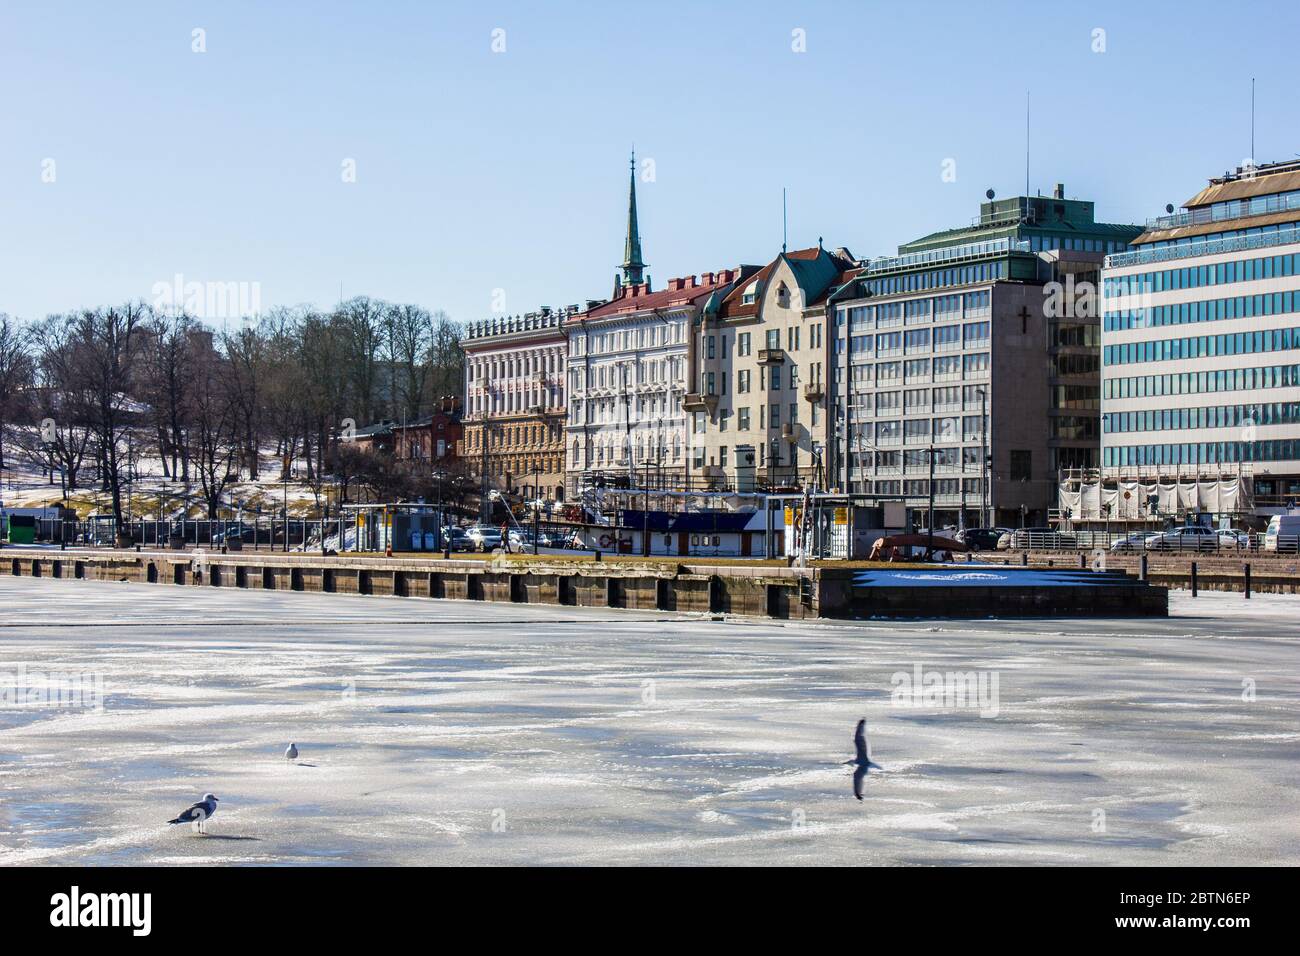 Helsinki, Finland - March 11, 2017: View of Buildings and the Baltic Sea in the South Harbour Stock Photo